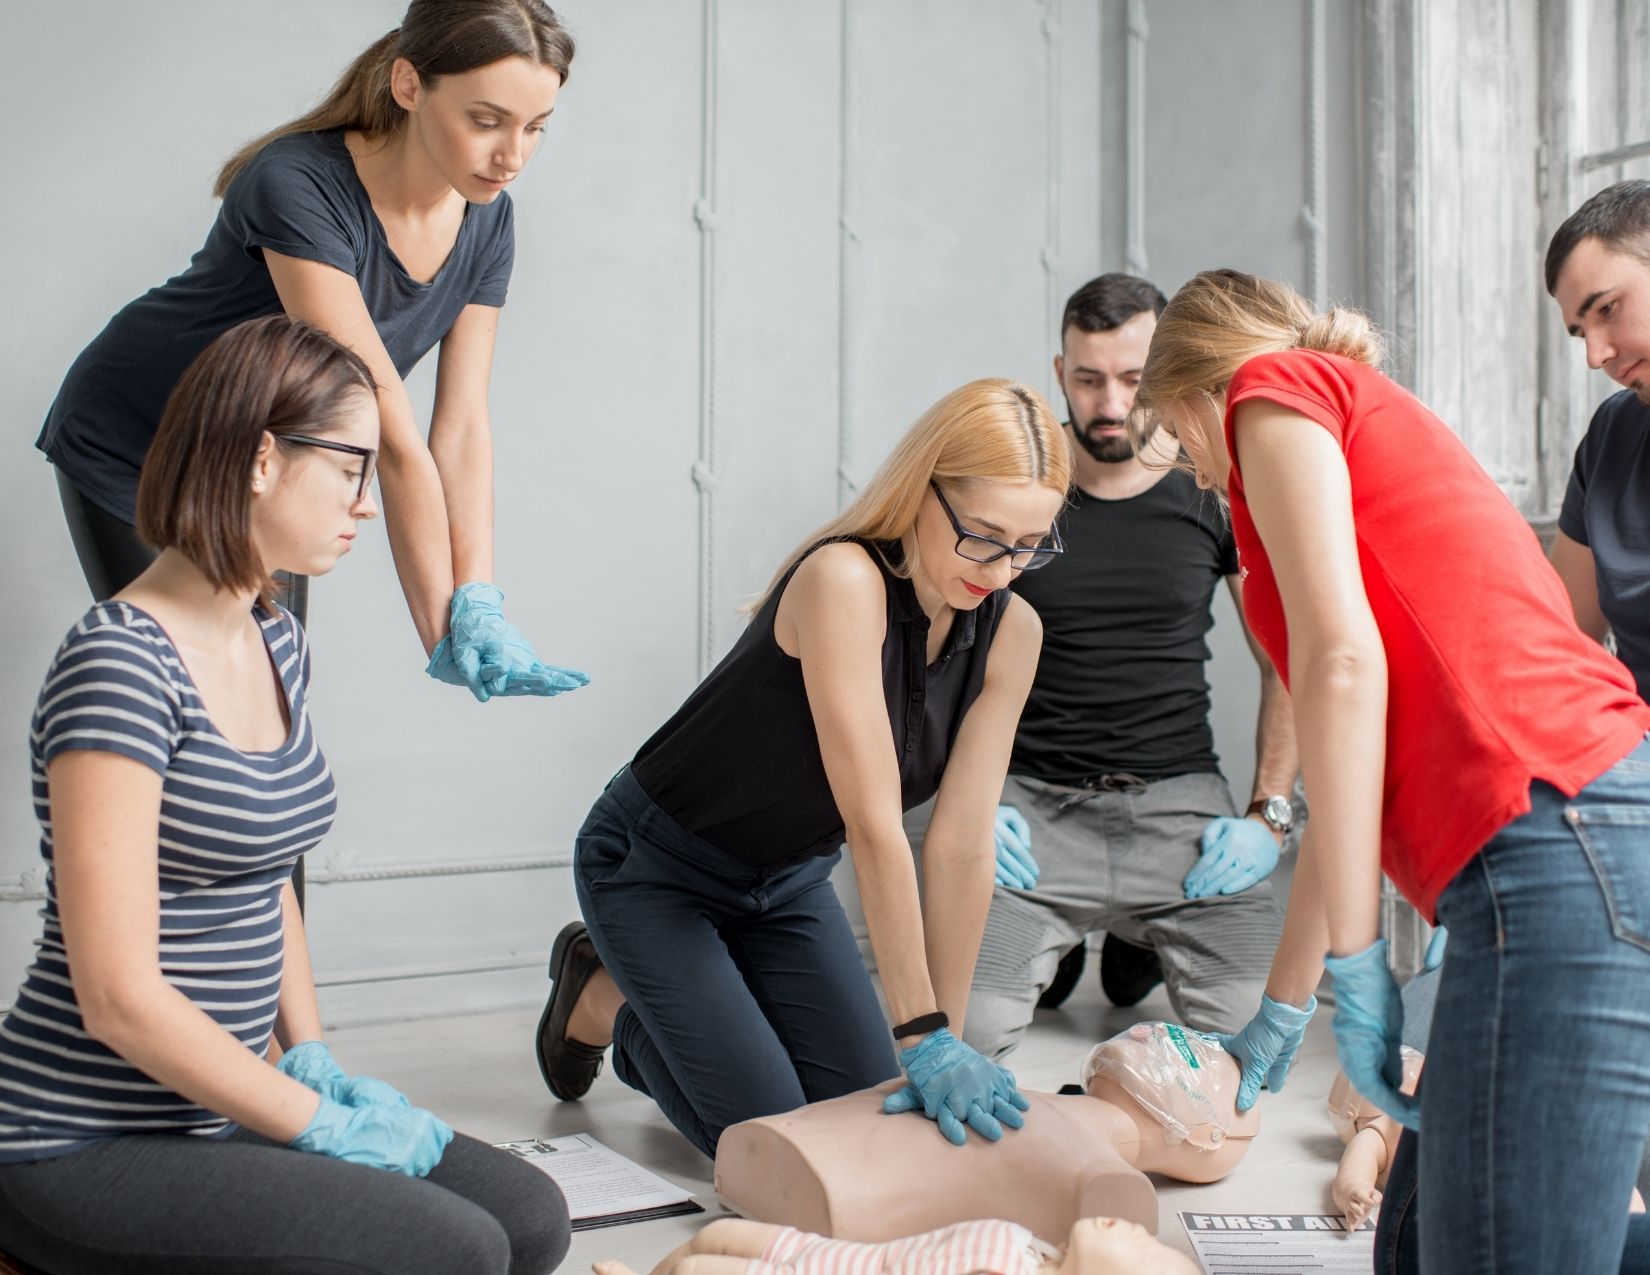 First Aid Training Courses Training, Mainland Safety, First Aid Training Services, Surrey, BC